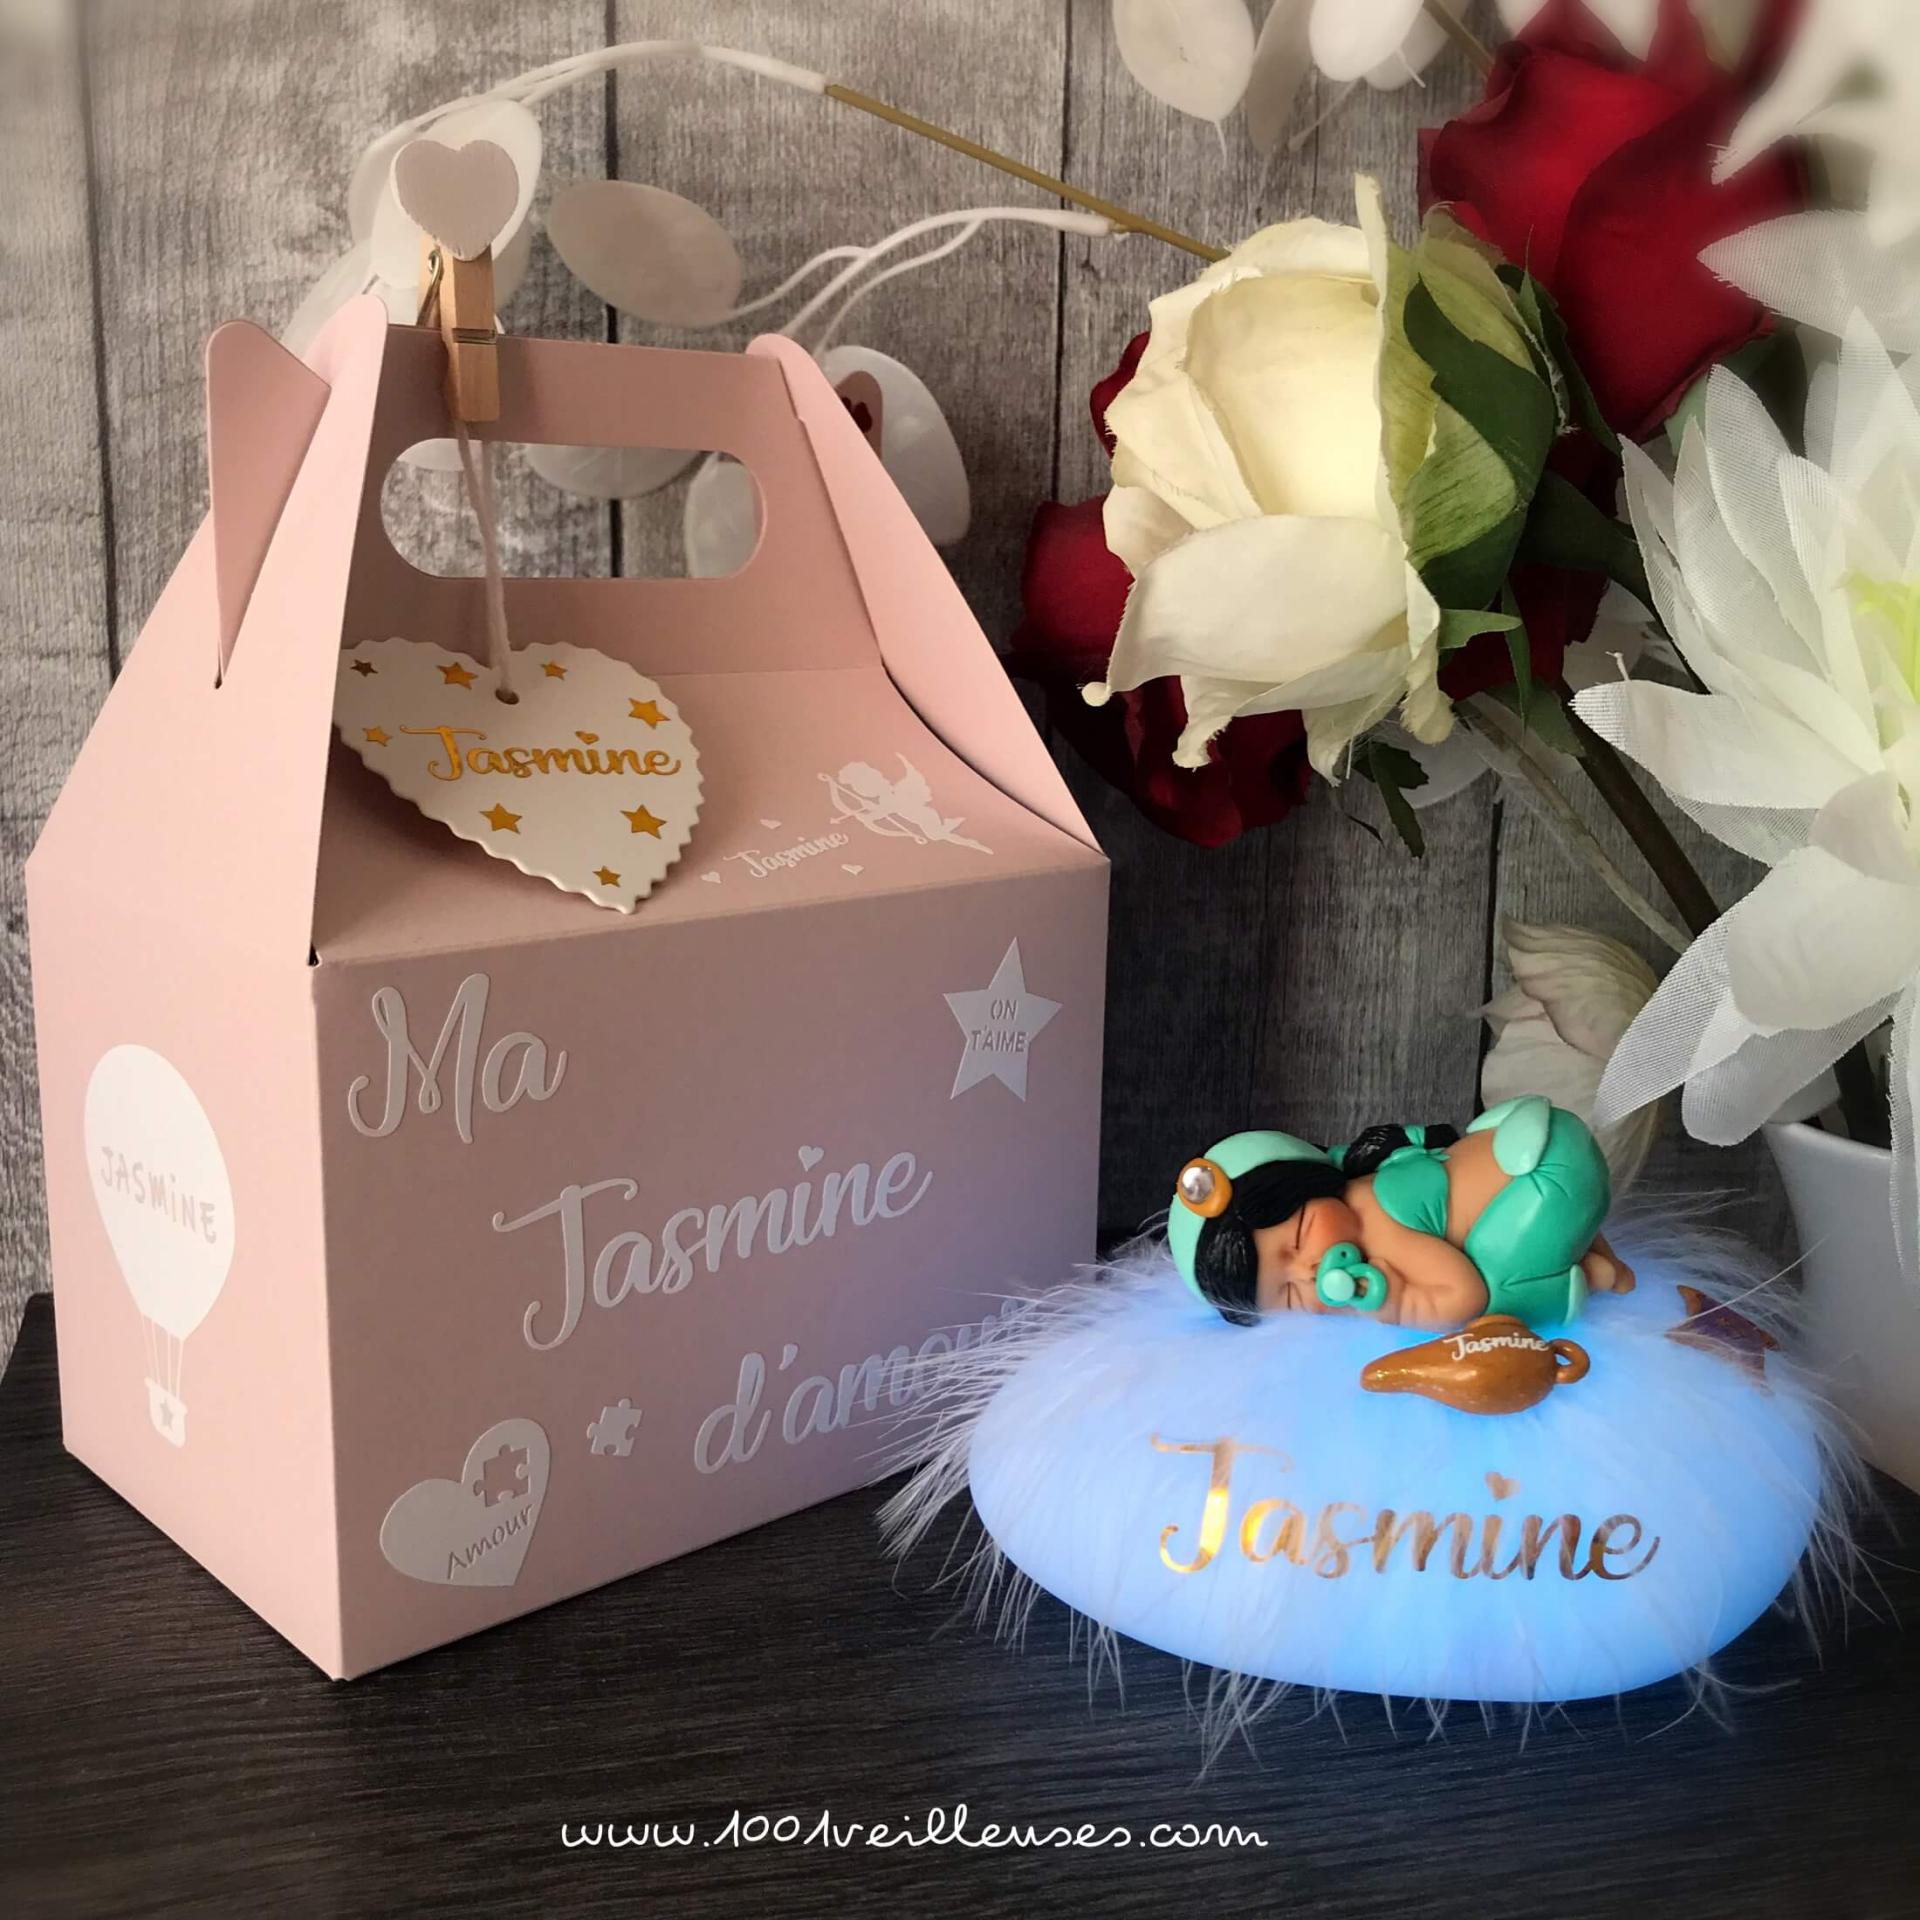 Beautiful handmade nightlight creation for a baby, a birth gift for a princess